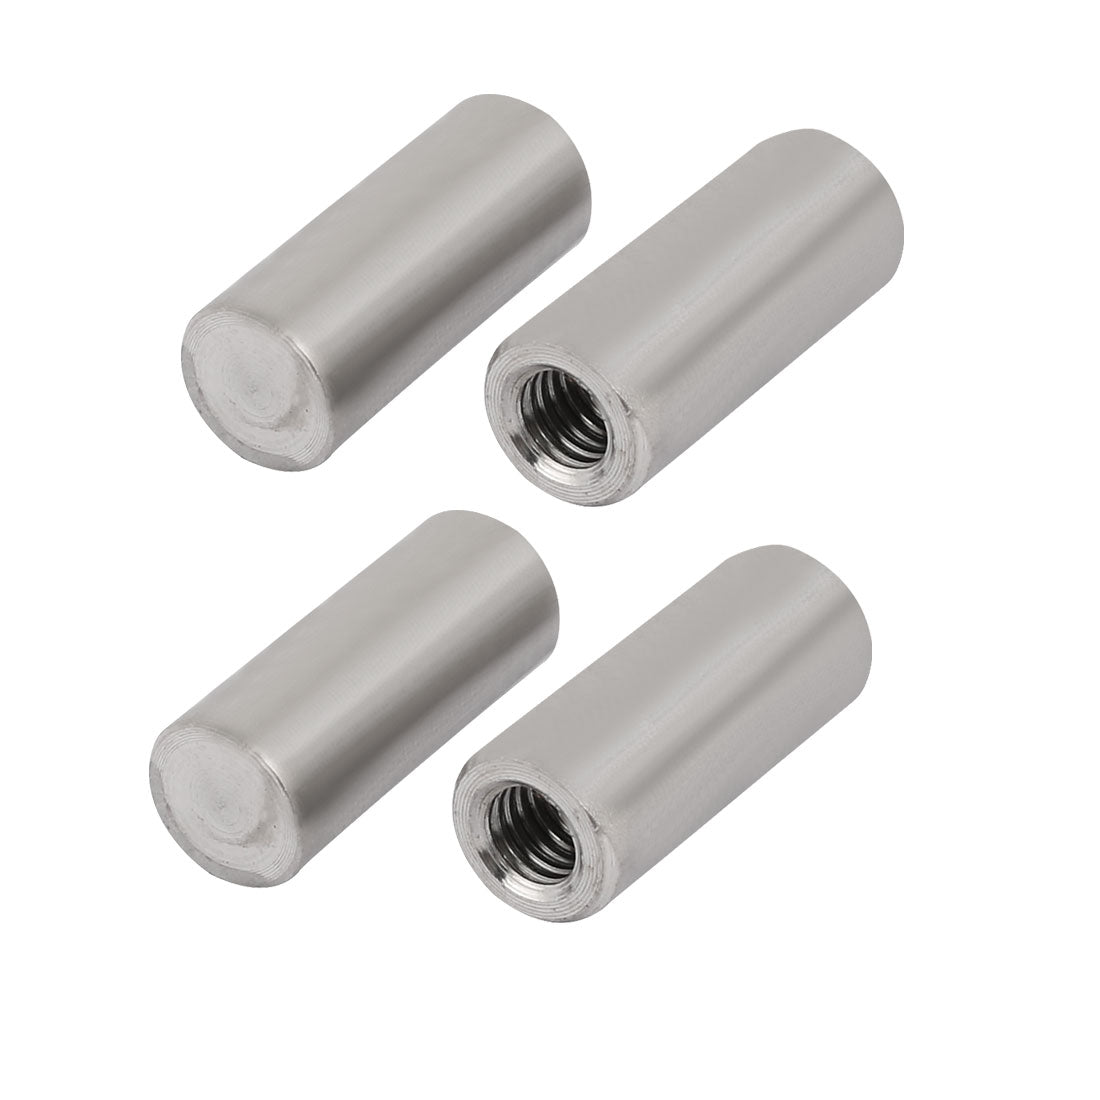 uxcell Uxcell 304 Stainless Steel M6 Female Thread 10mm x 25mm Cylindrical Dowel Pin 4pcs